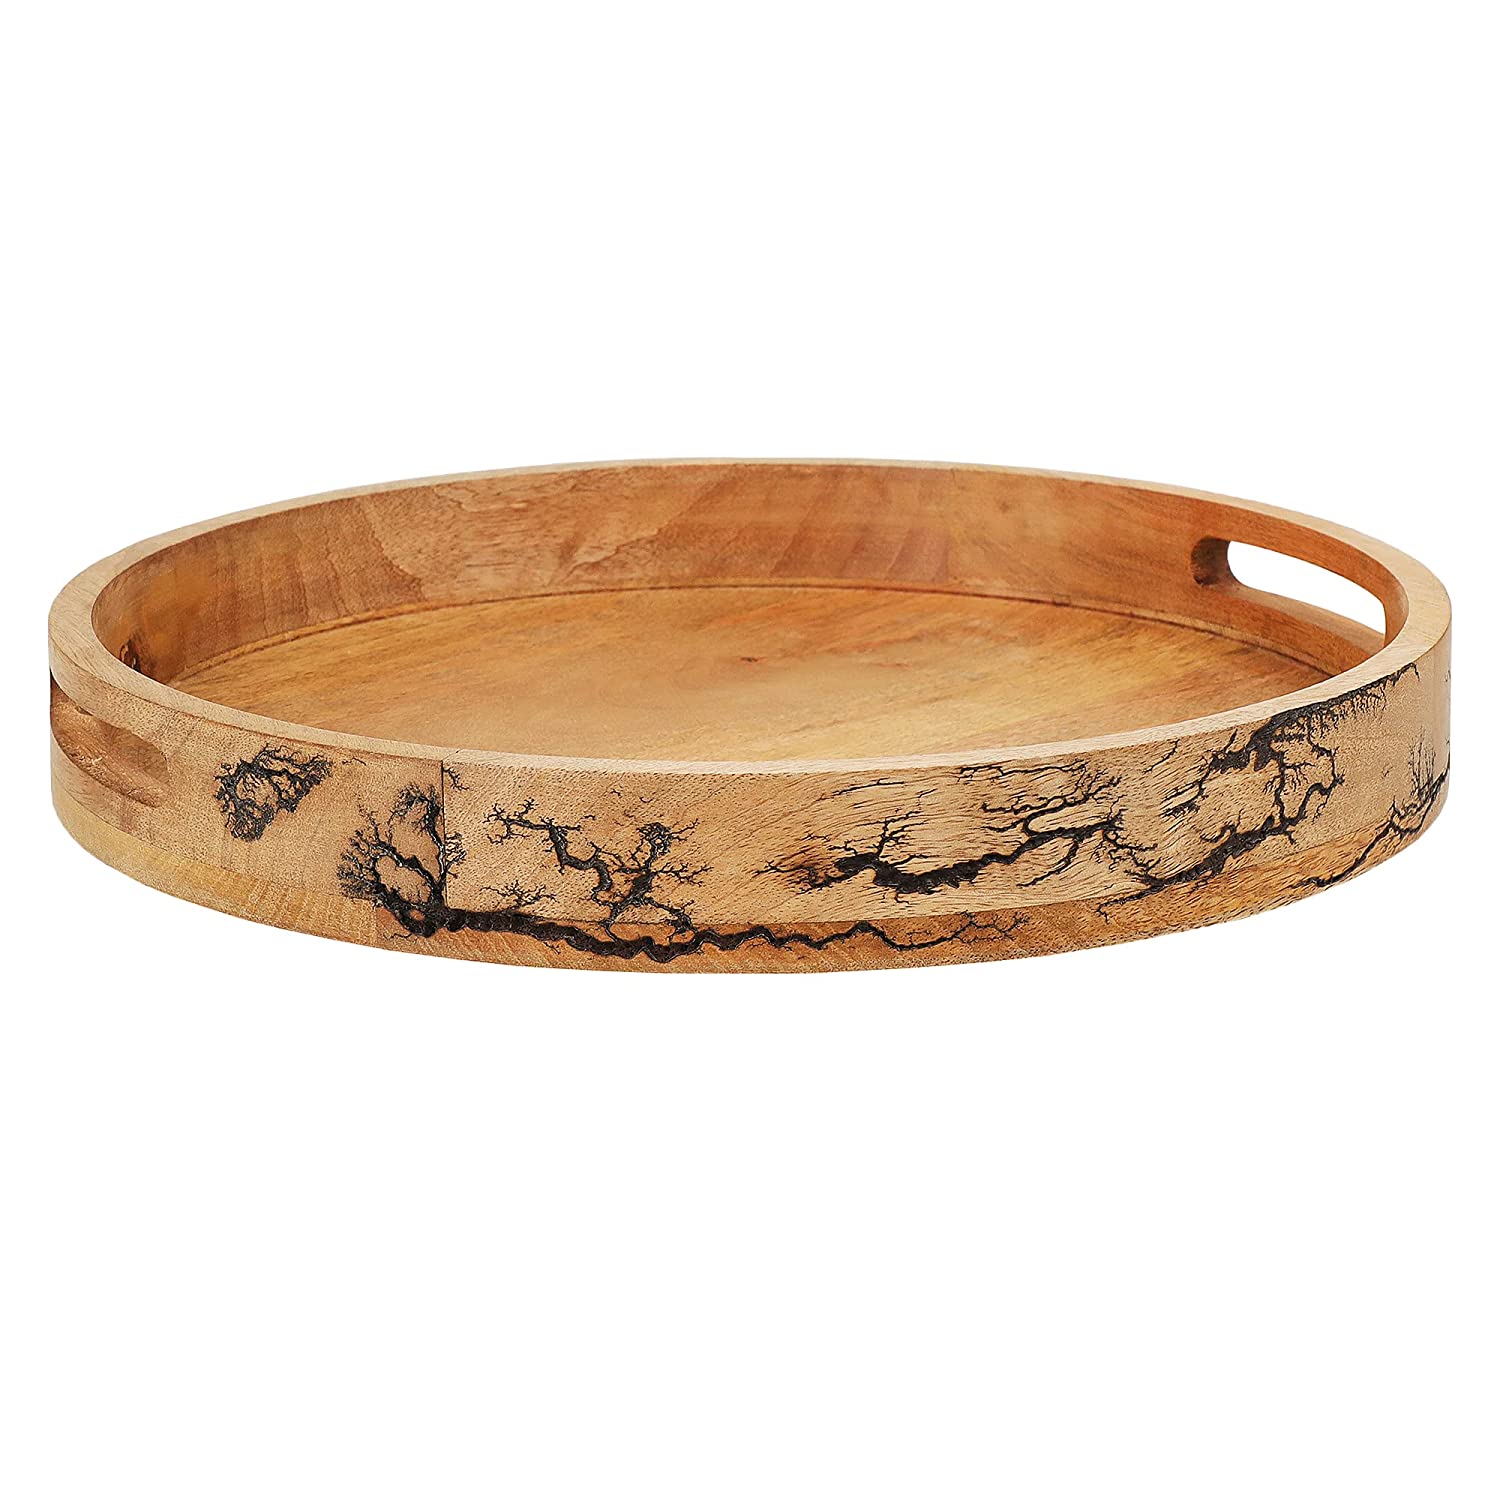 Standard Wooden Large Round Serving Tray with Handles | Handcrafted Serving Tray with Engraved Design